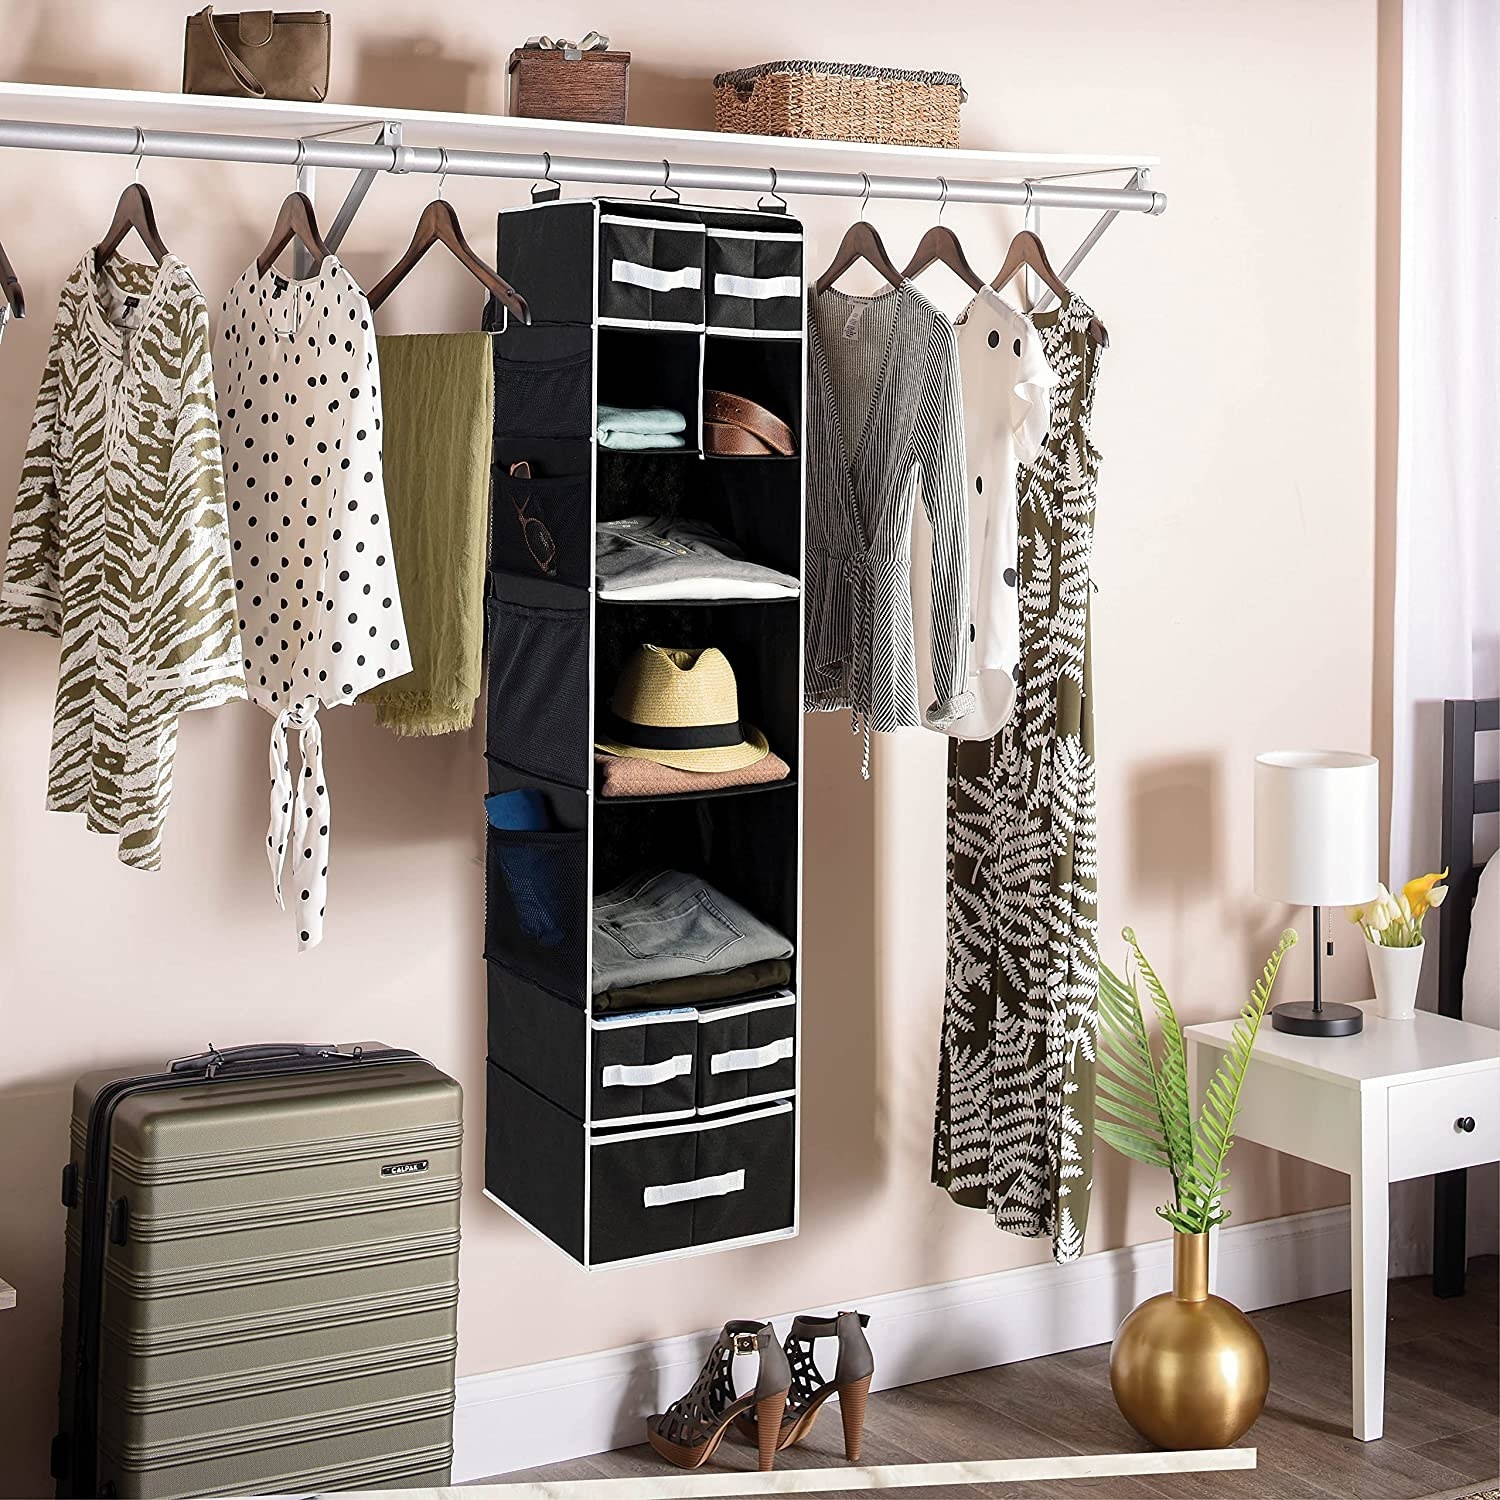 The filled organizer hanging on a closet rod between rows of shirts and dresses